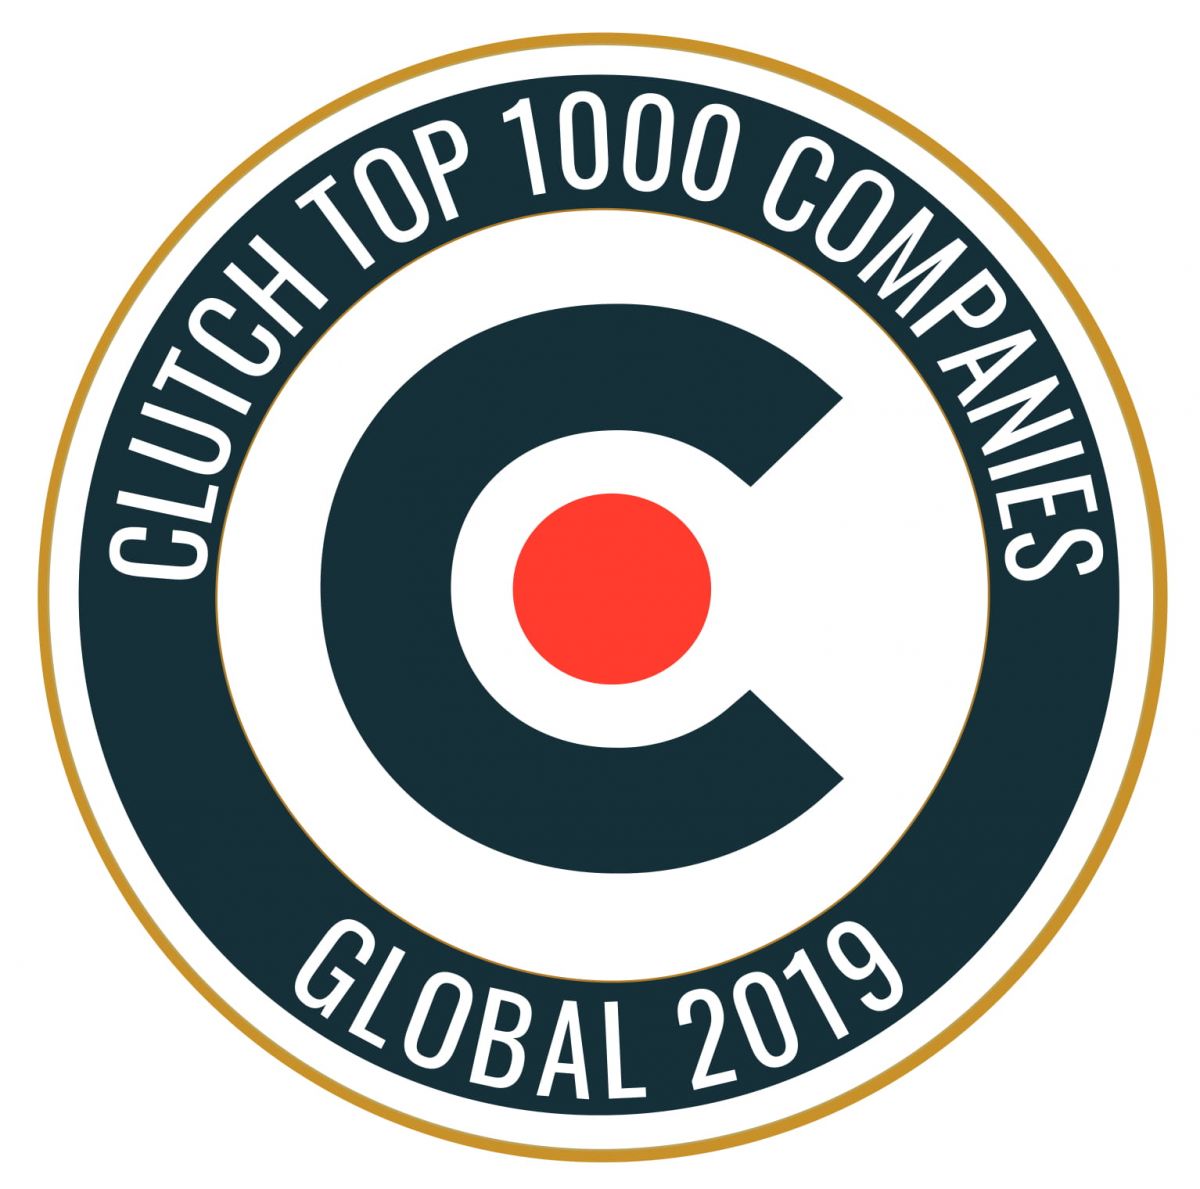 Clutch Recognizes the 1000 Best B2B Service Providers in its Exclusive 2019 Clutch 1000 List